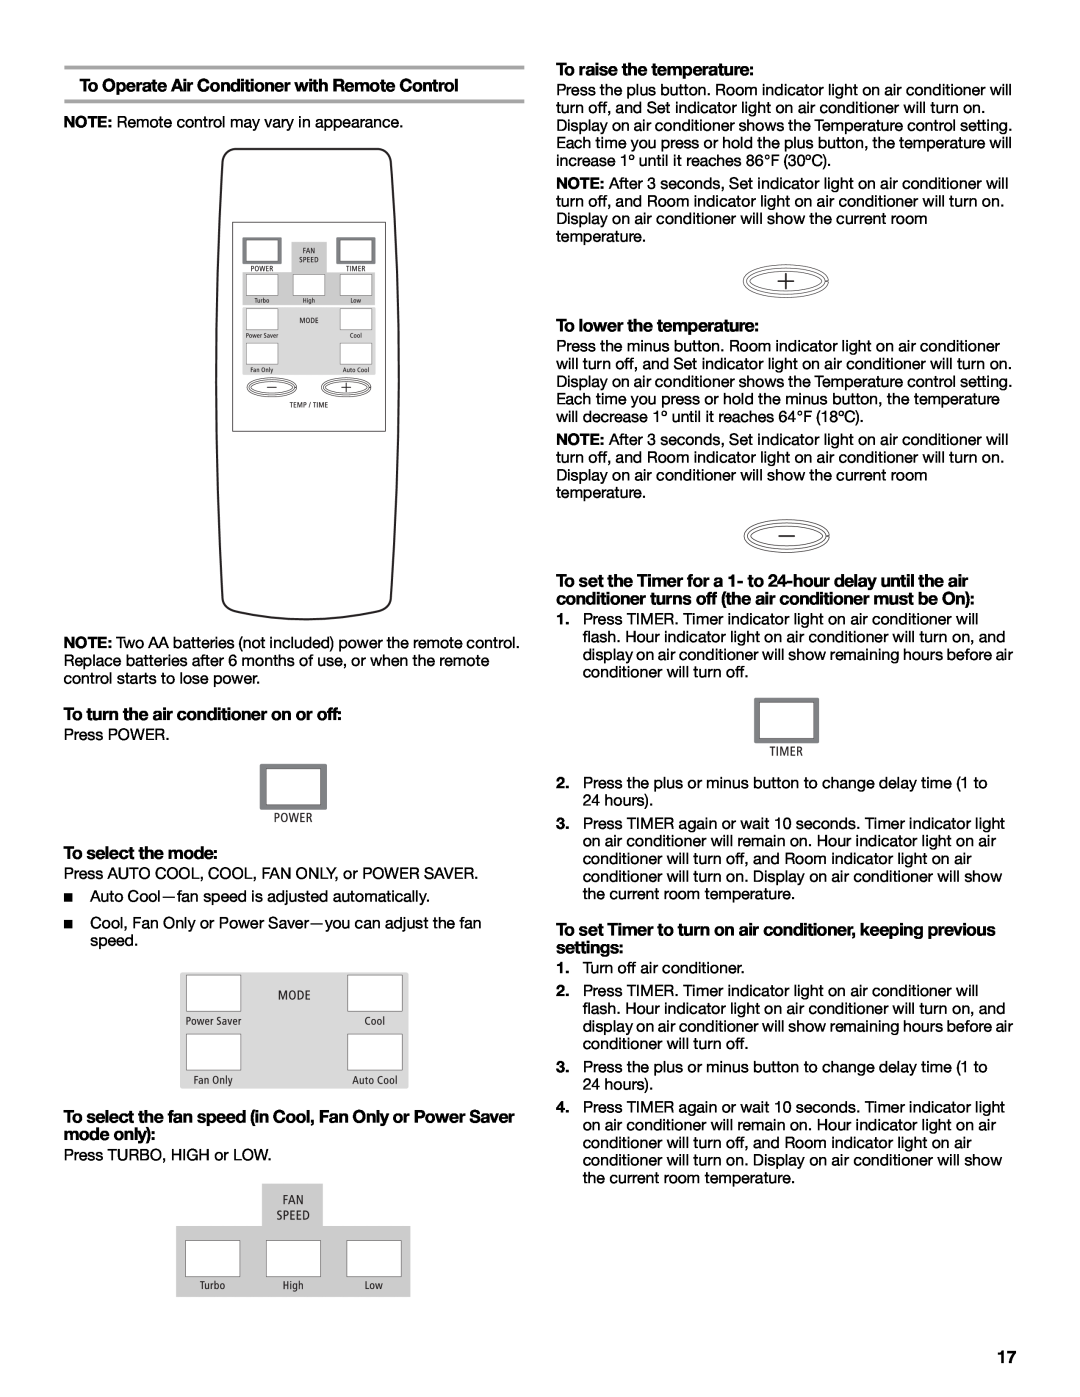 Whirlpool CA15WYR0 manual To Operate Air Conditioner with Remote Control, To turn the air conditioner on or off 